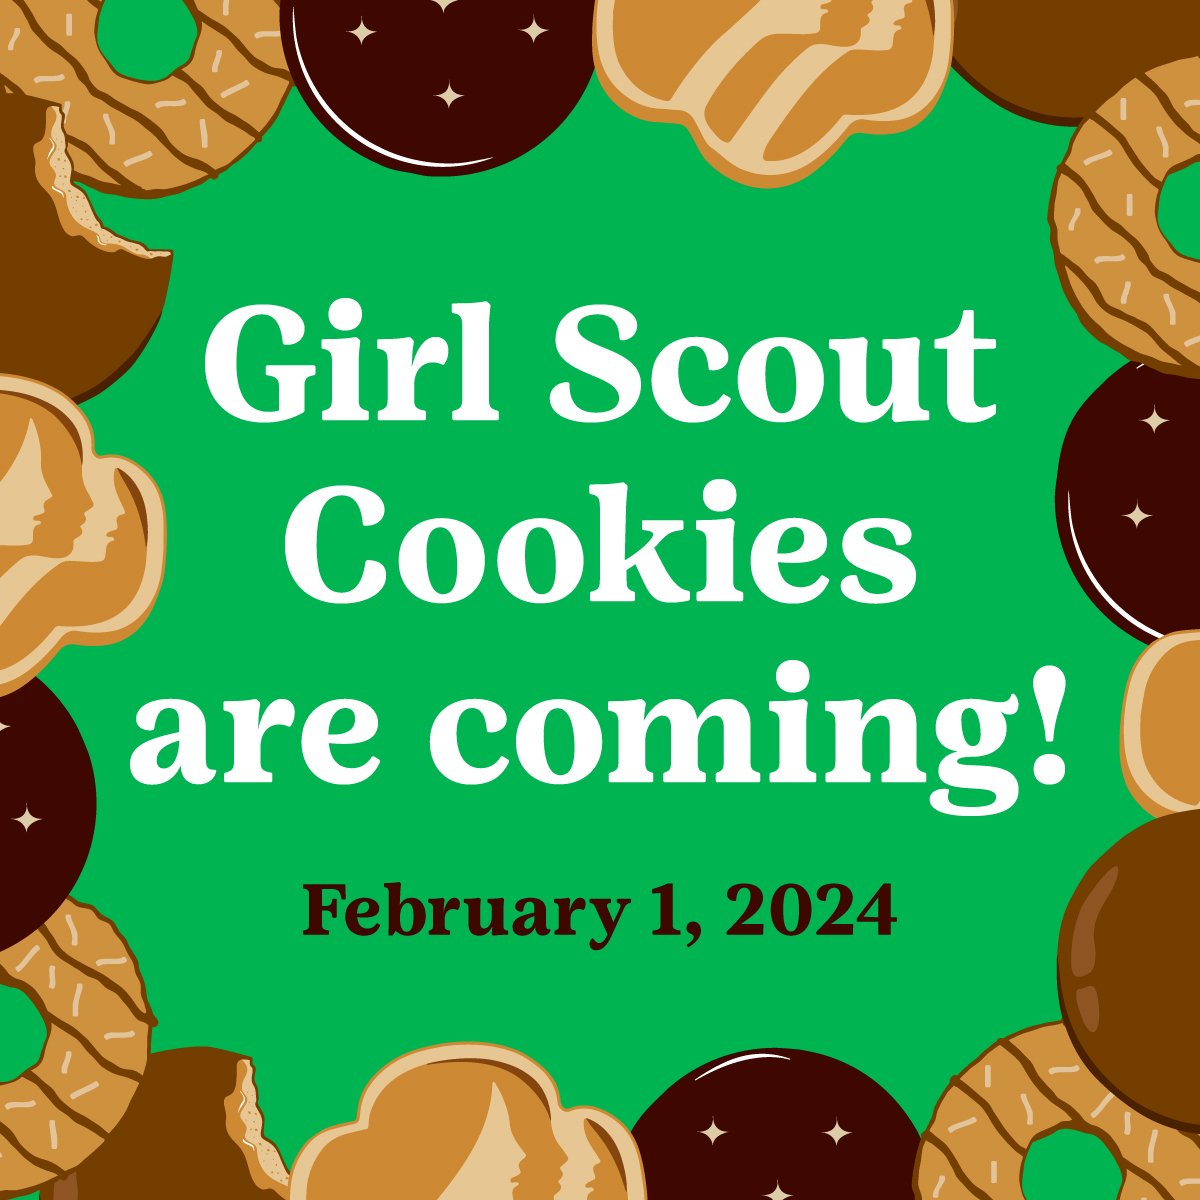 Green block with text "Girl Scout Cookies are Coming! February 1, 2024" with illustrations of cookie varieties along the border